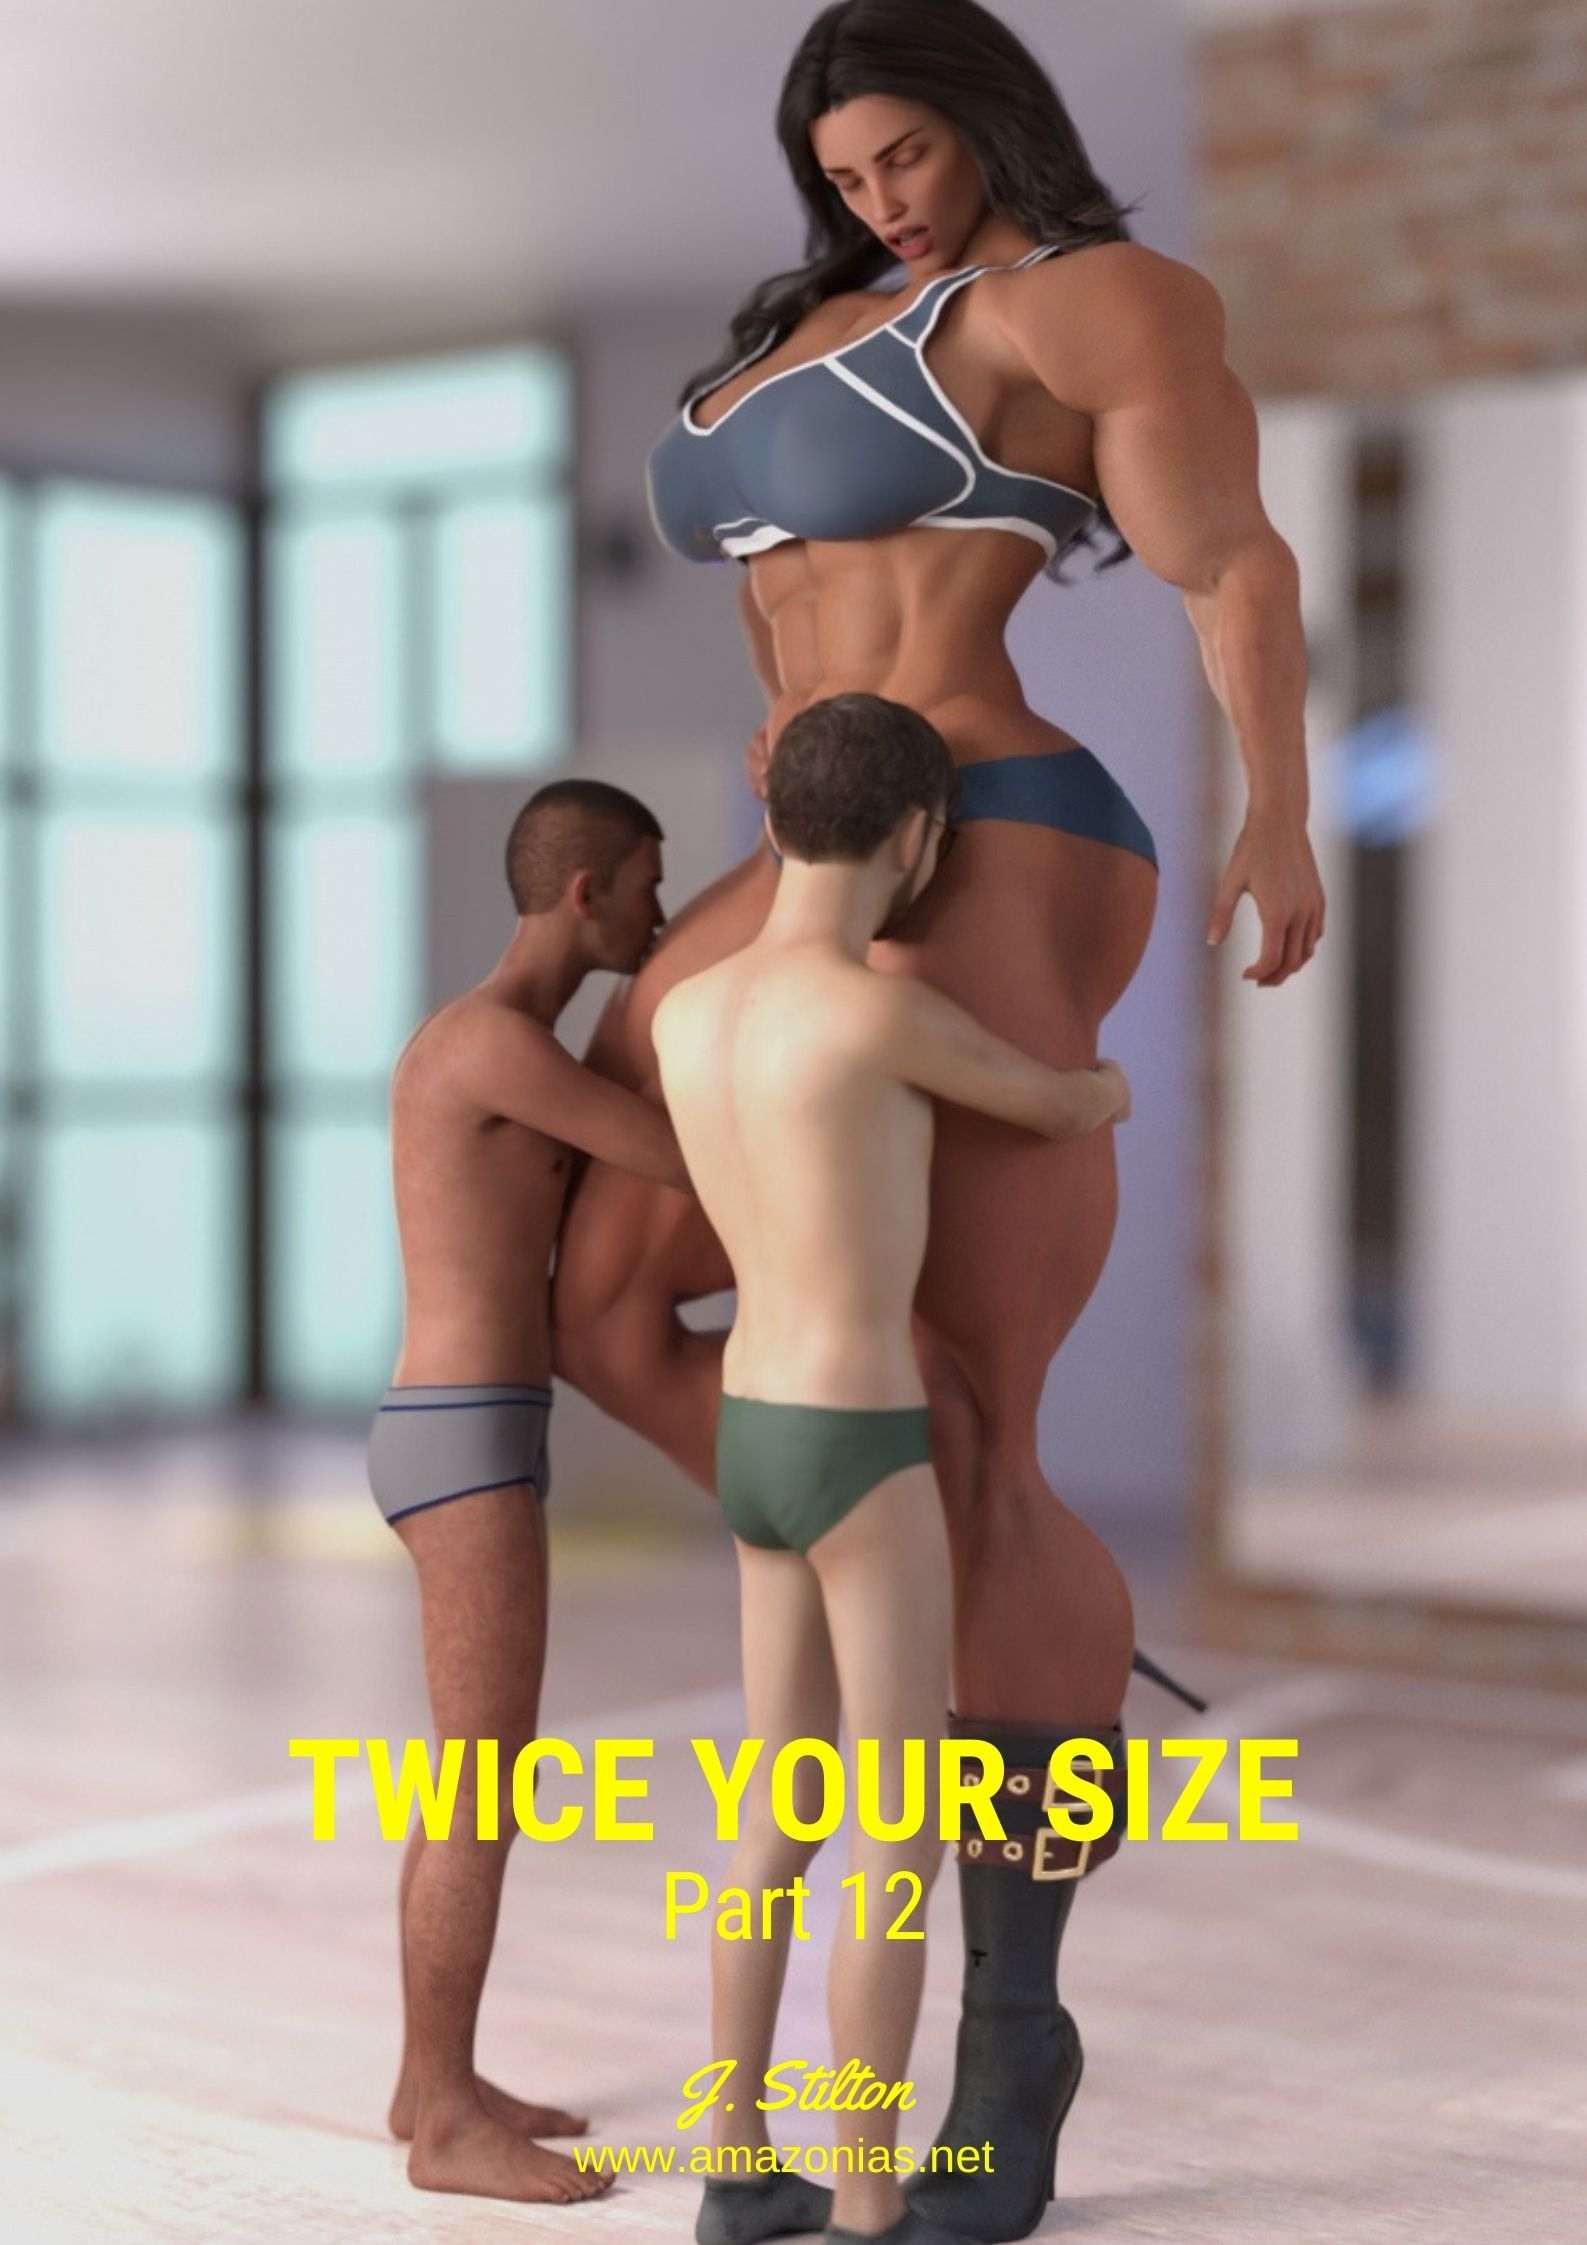 huge female bodybuilder and two small guys